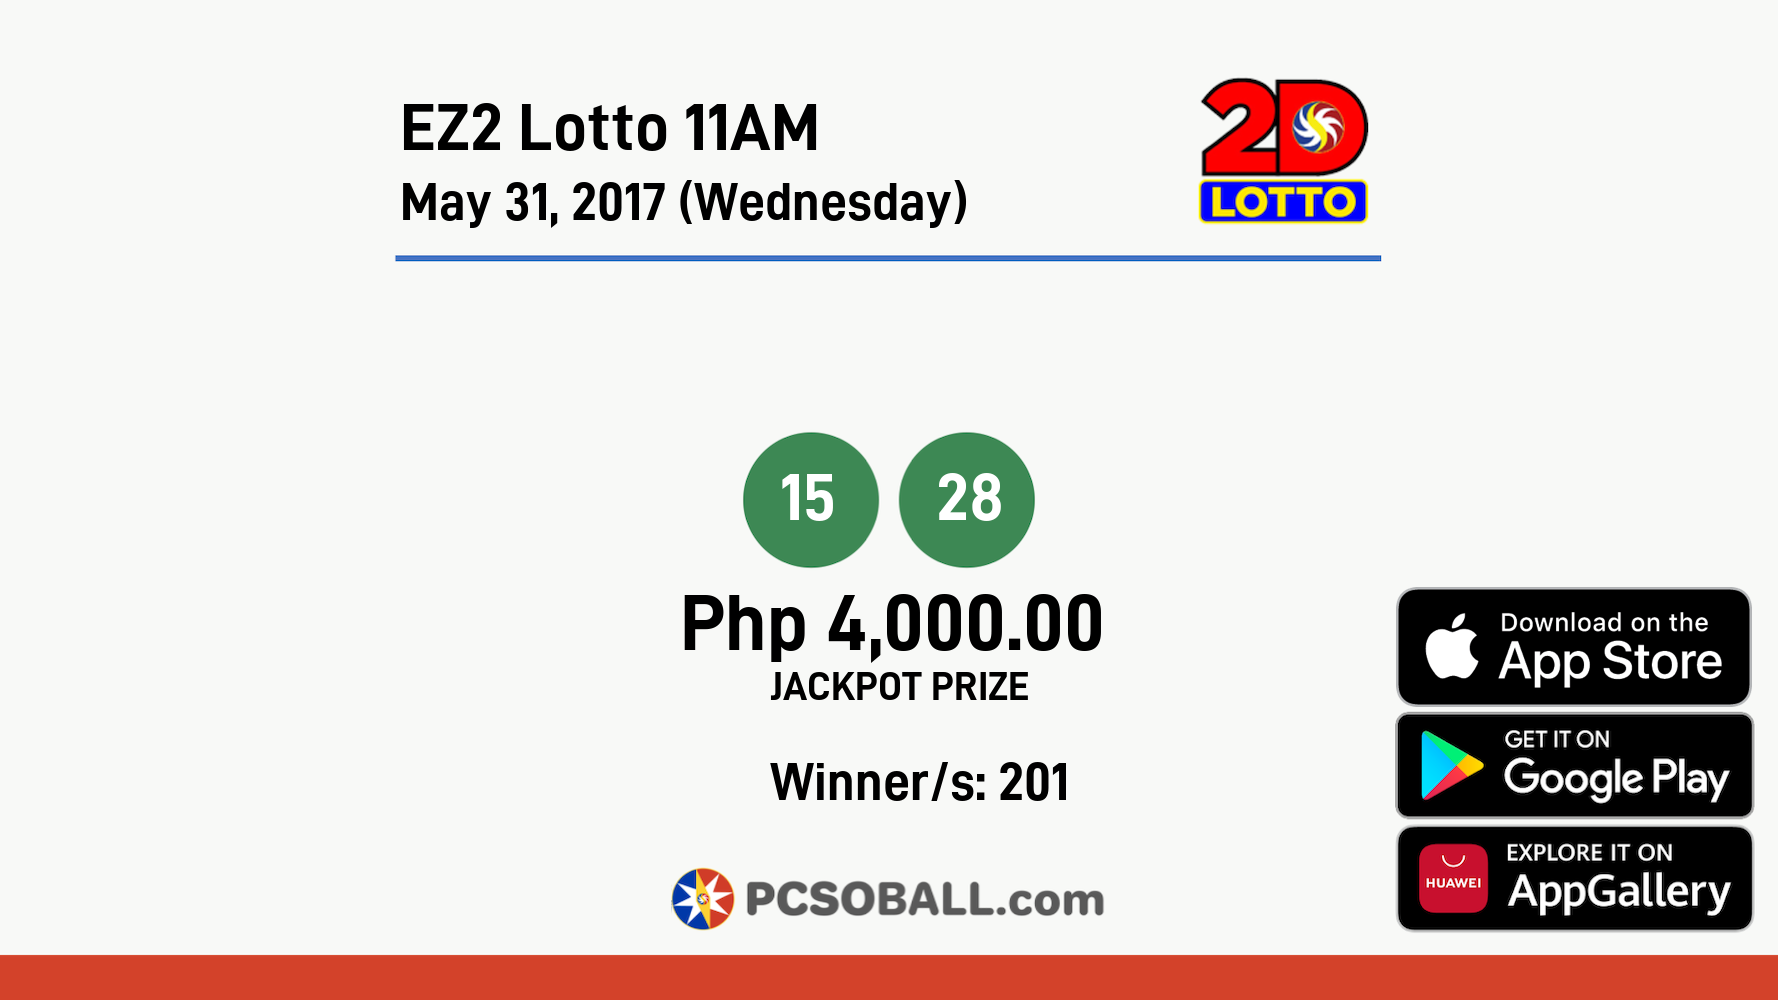 EZ2 Lotto 11AM May 31, 2017 (Wednesday) Result